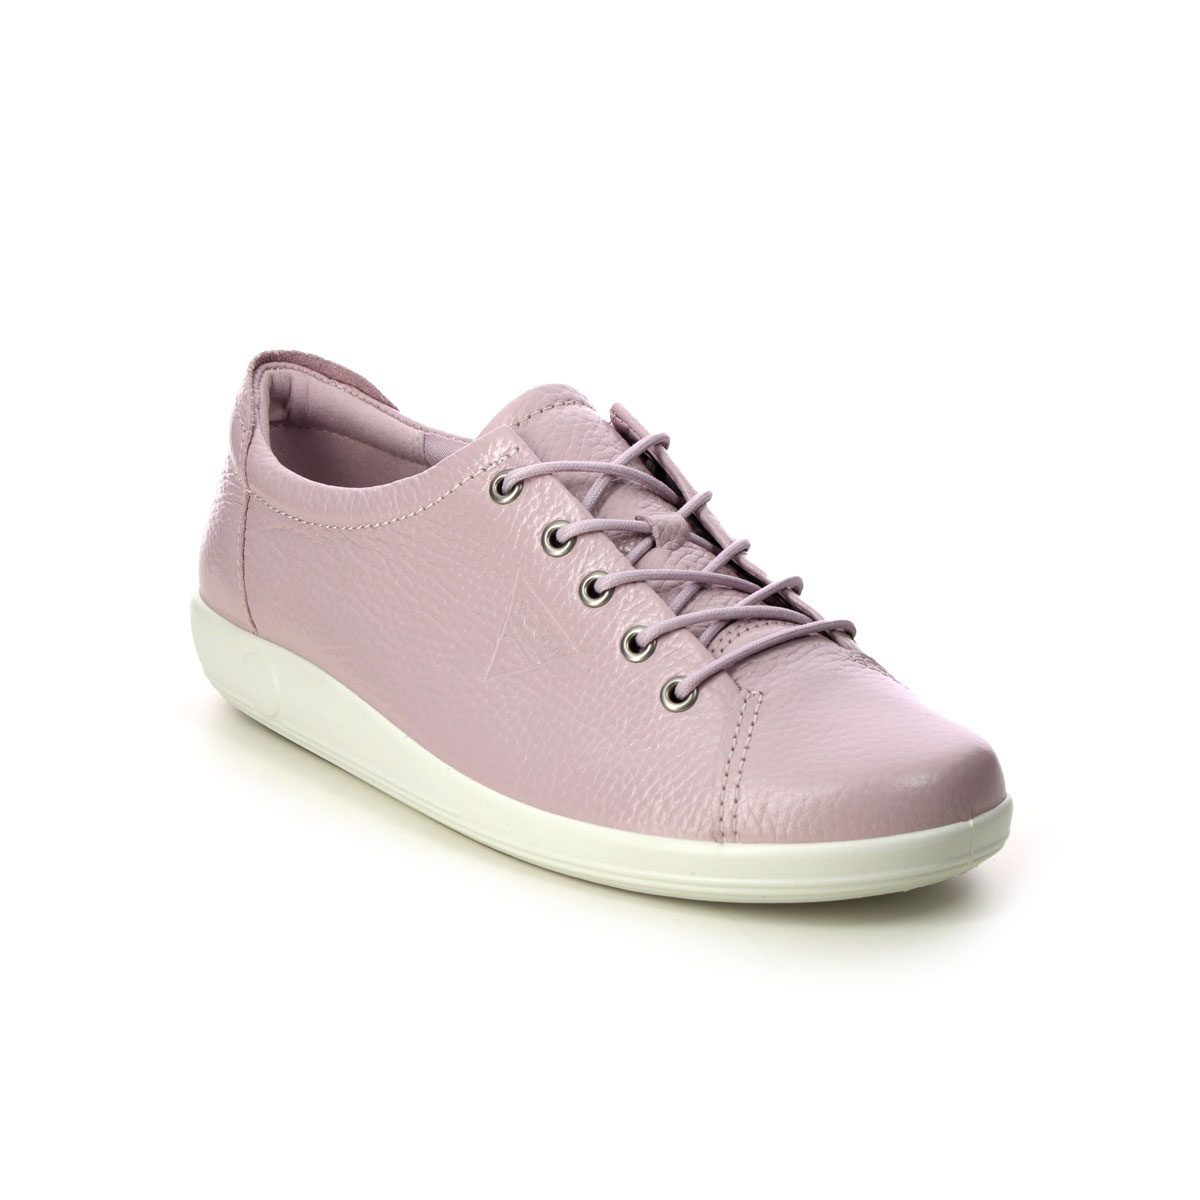 ECCO Soft 2.0 Violet Womens lacing shoes 206503-01405 in a Plain Leather in Size 41